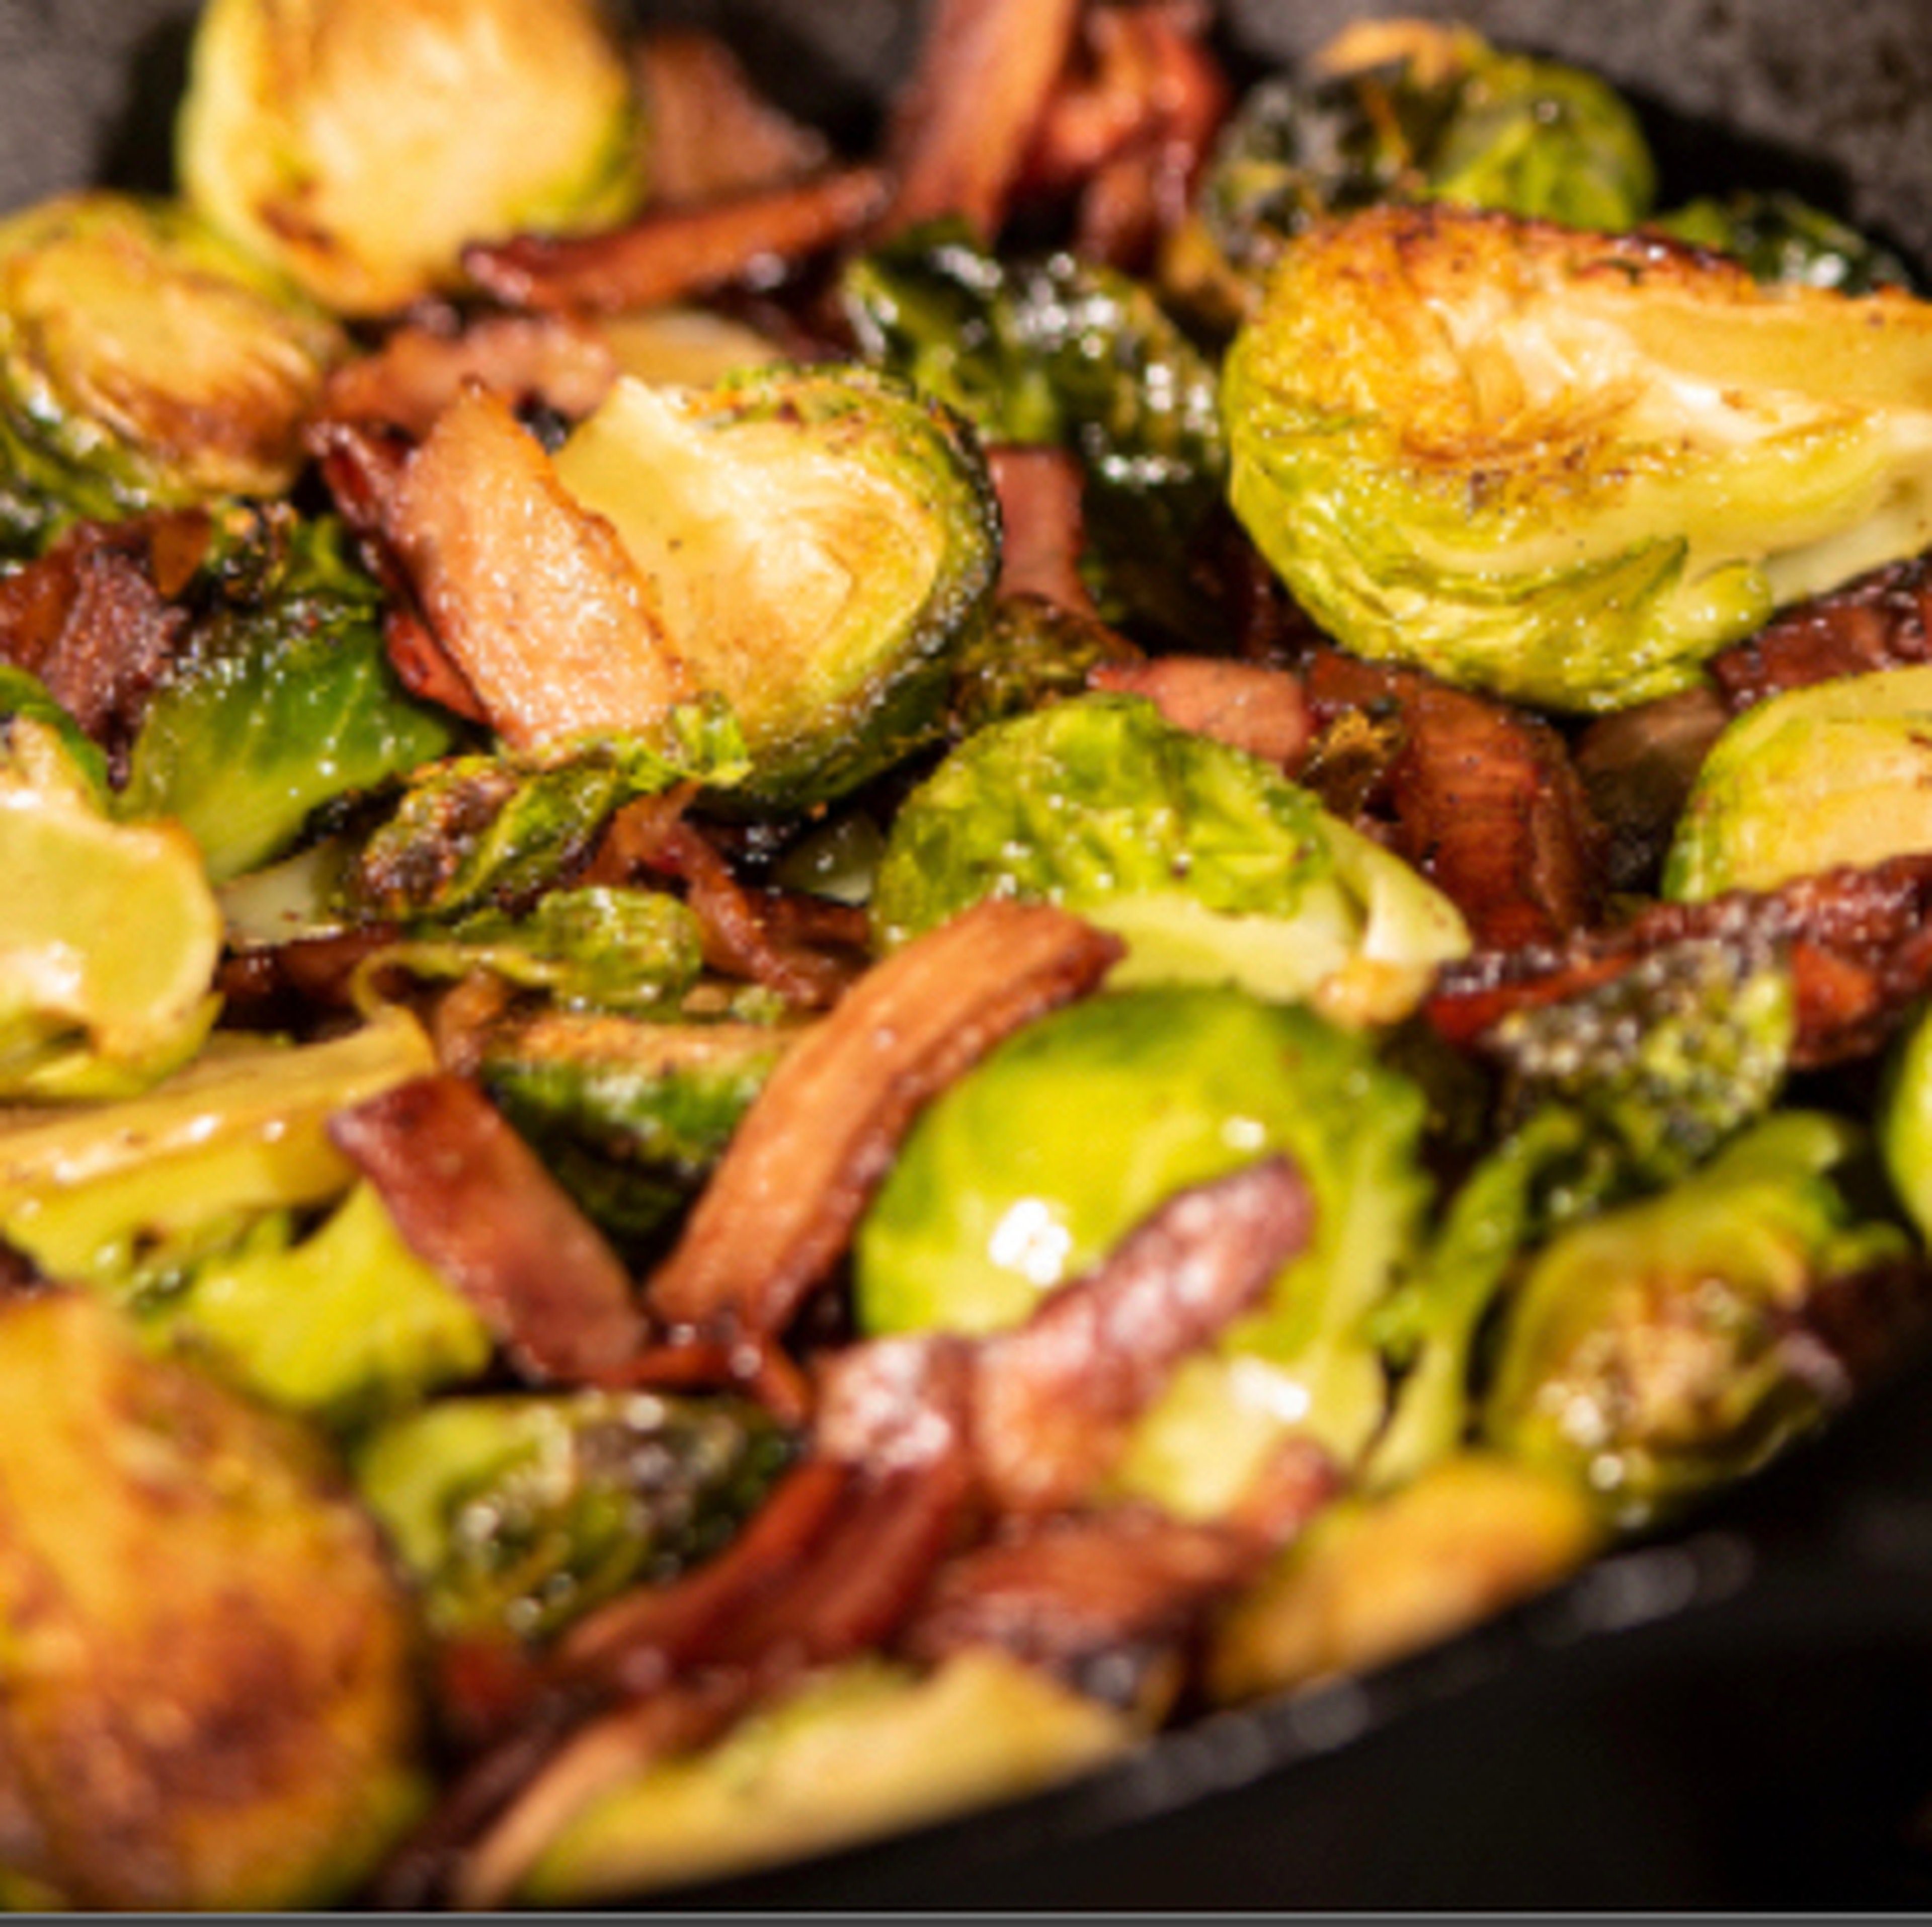 Roasted brussels sprouts and beer bacon￼